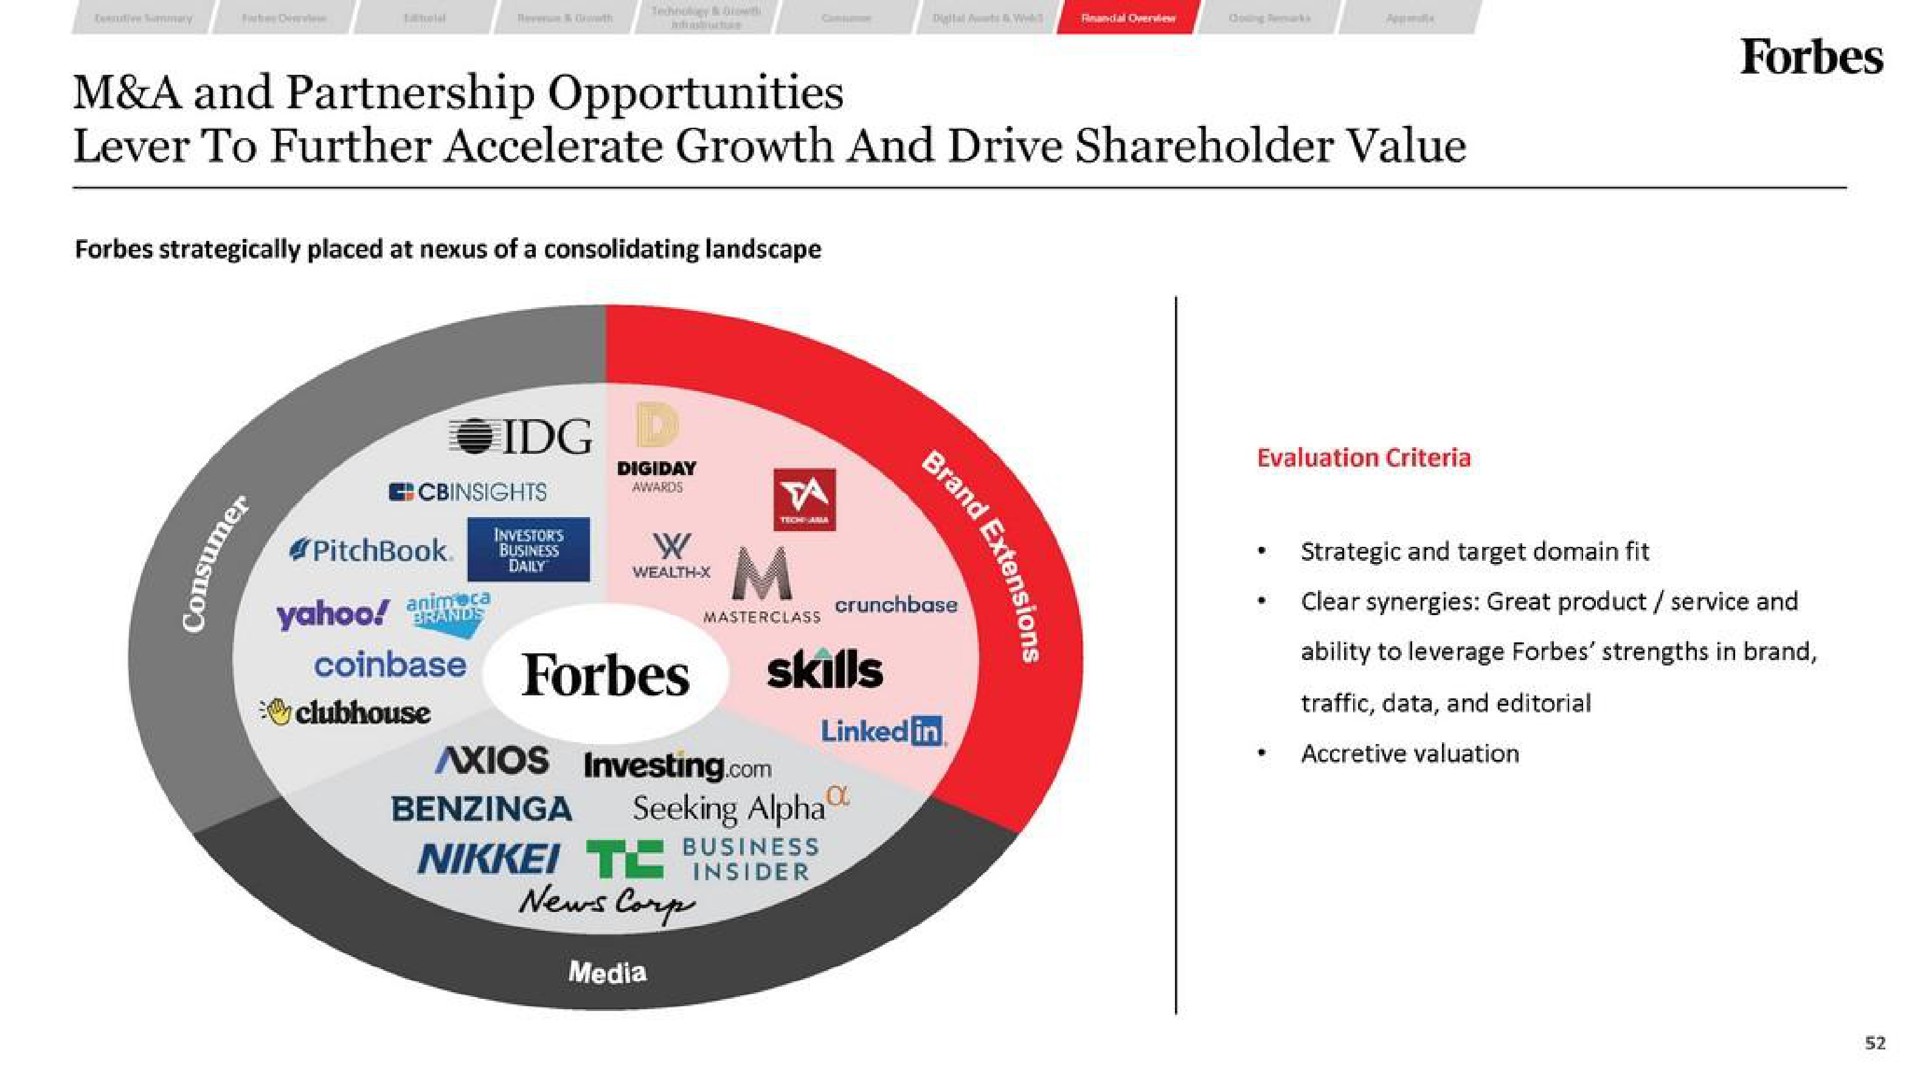 a and partnership opportunities forb orbes investing on | Forbes